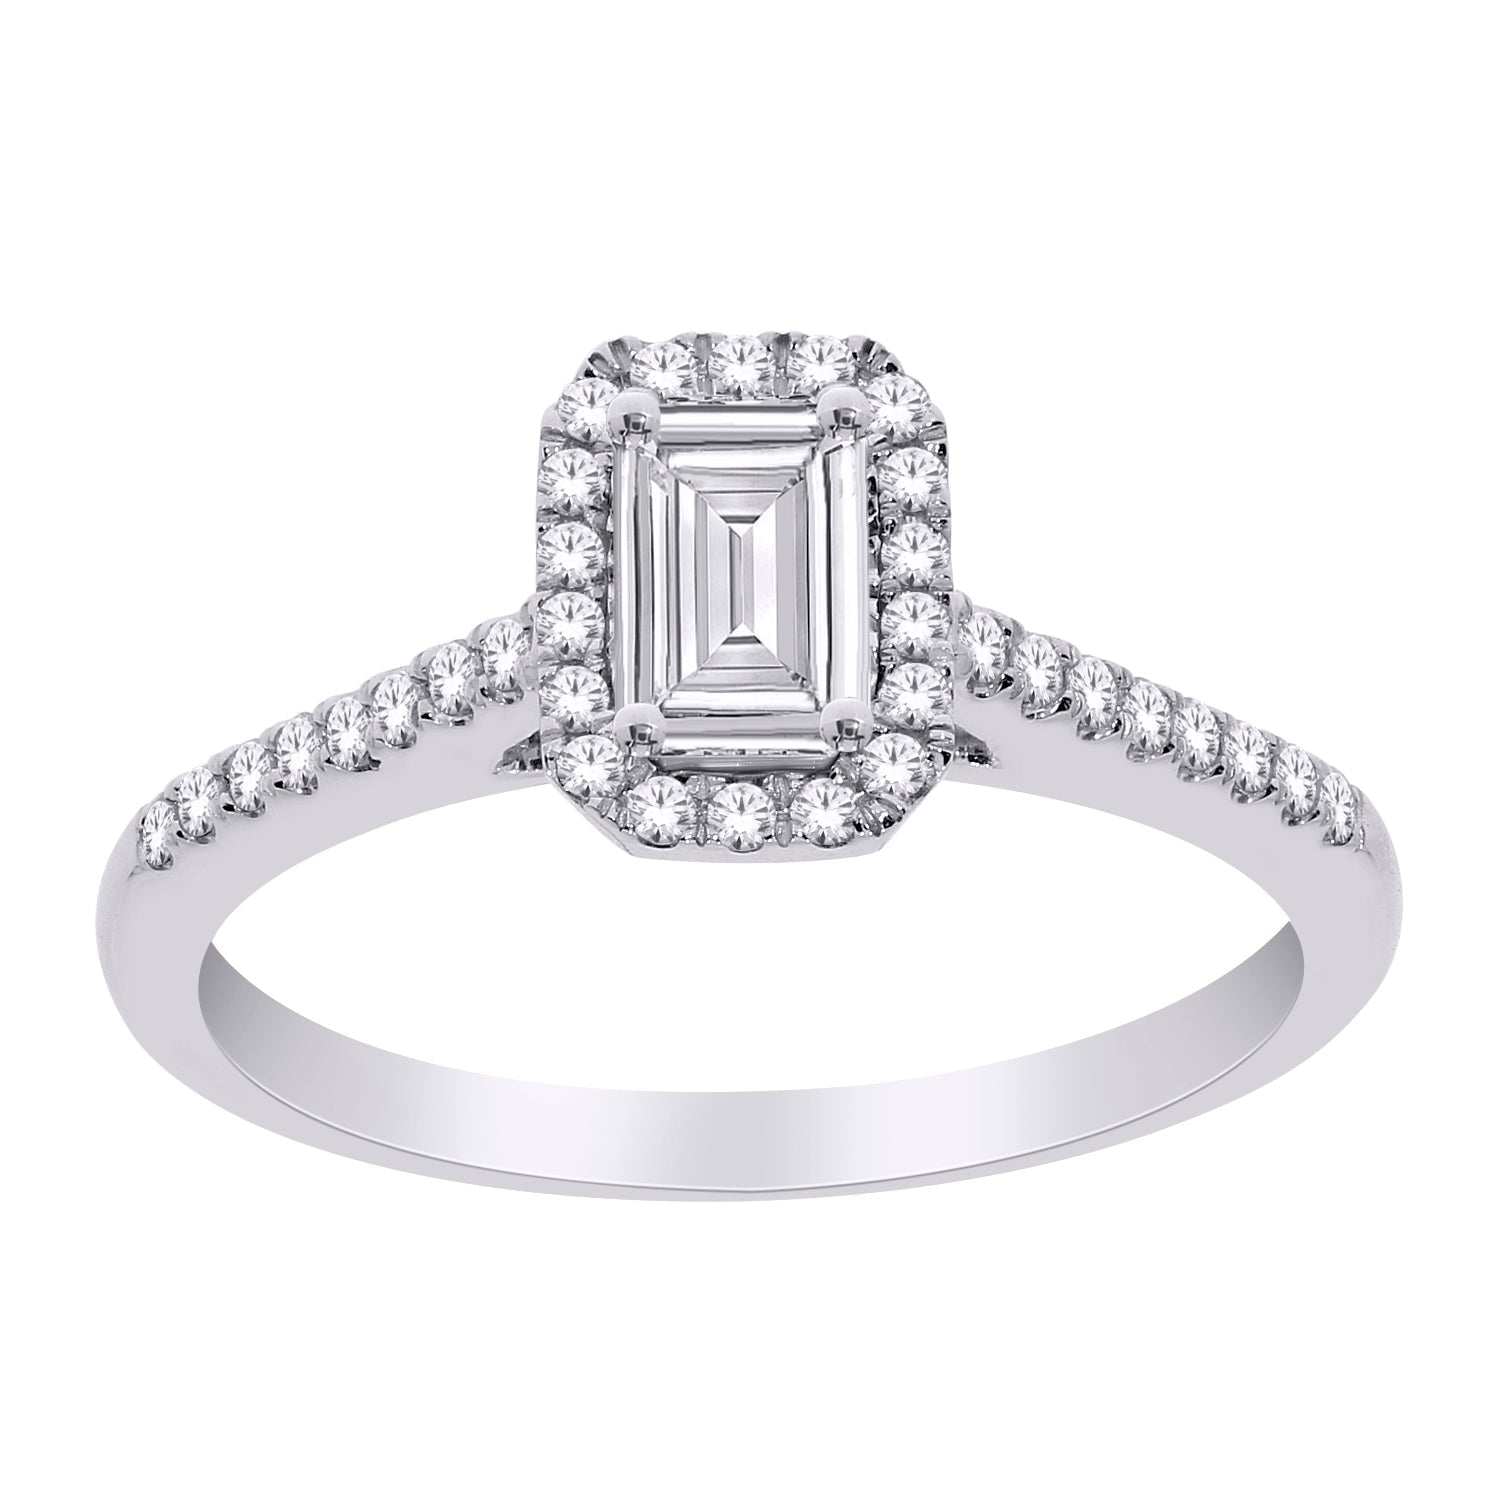 14K WHITE GOLD EMERALD CUT ENGAGEMENT RING.